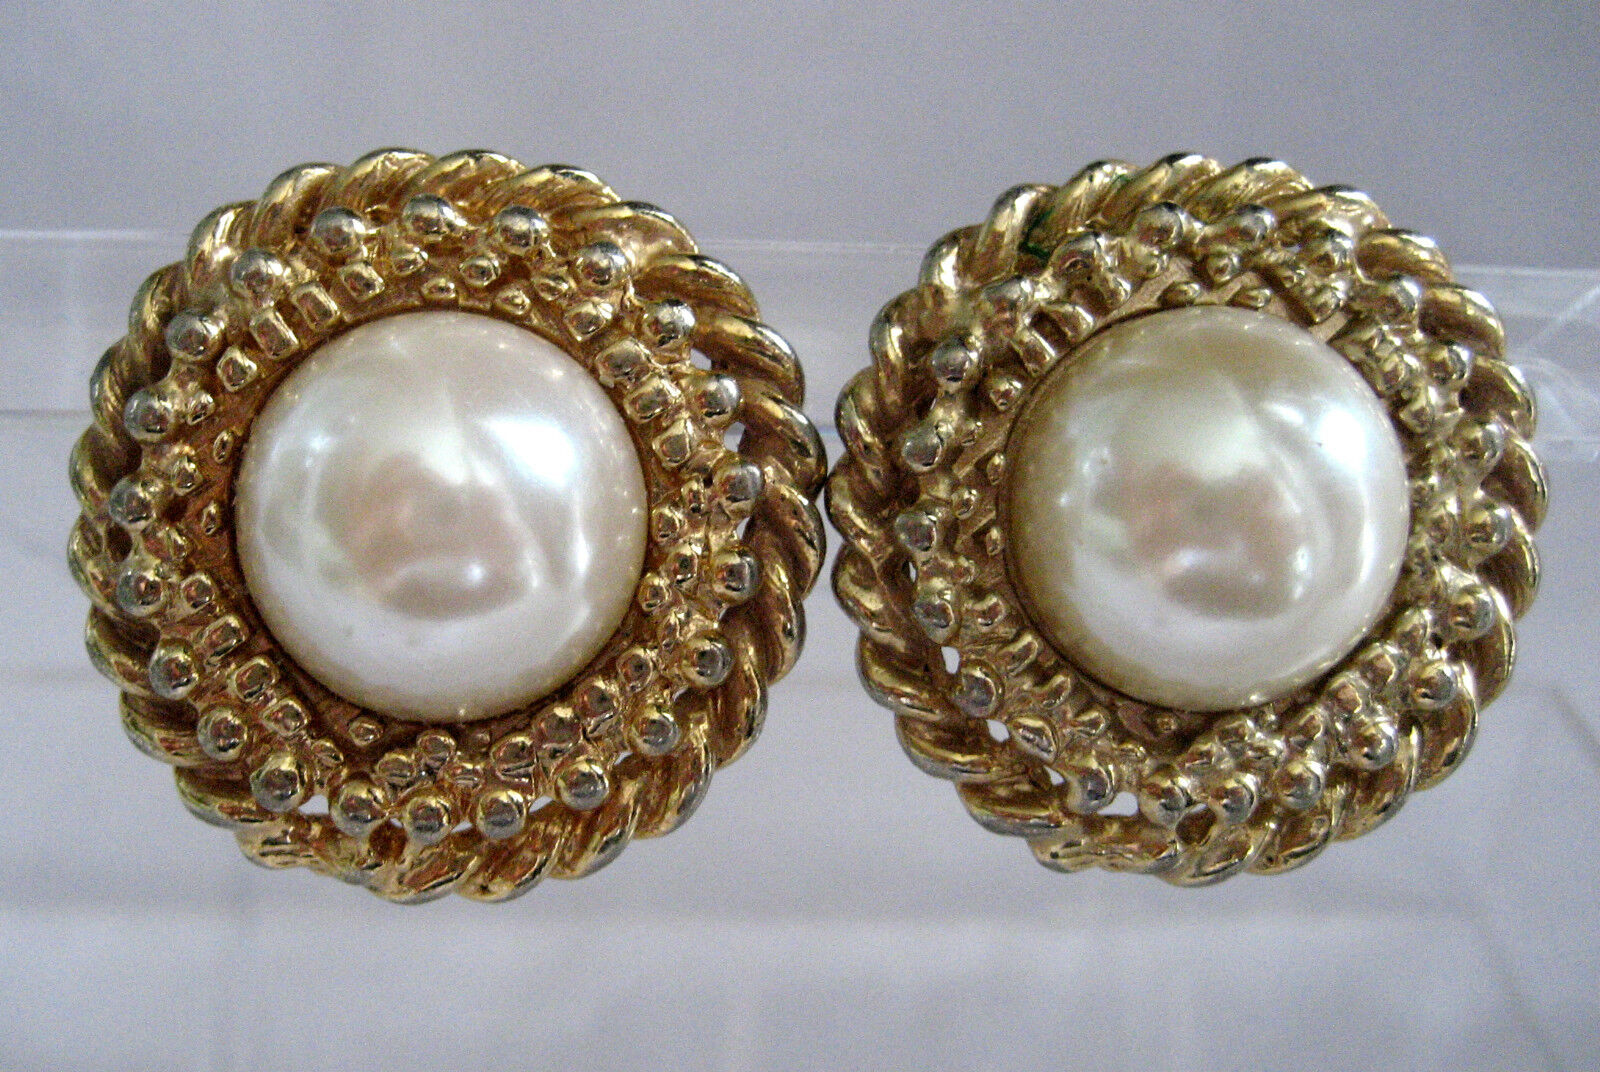 ERWIN PEARL GOLD TONE AND  FAUX PEARL EARRINGS CLIP ONS VINTAGE